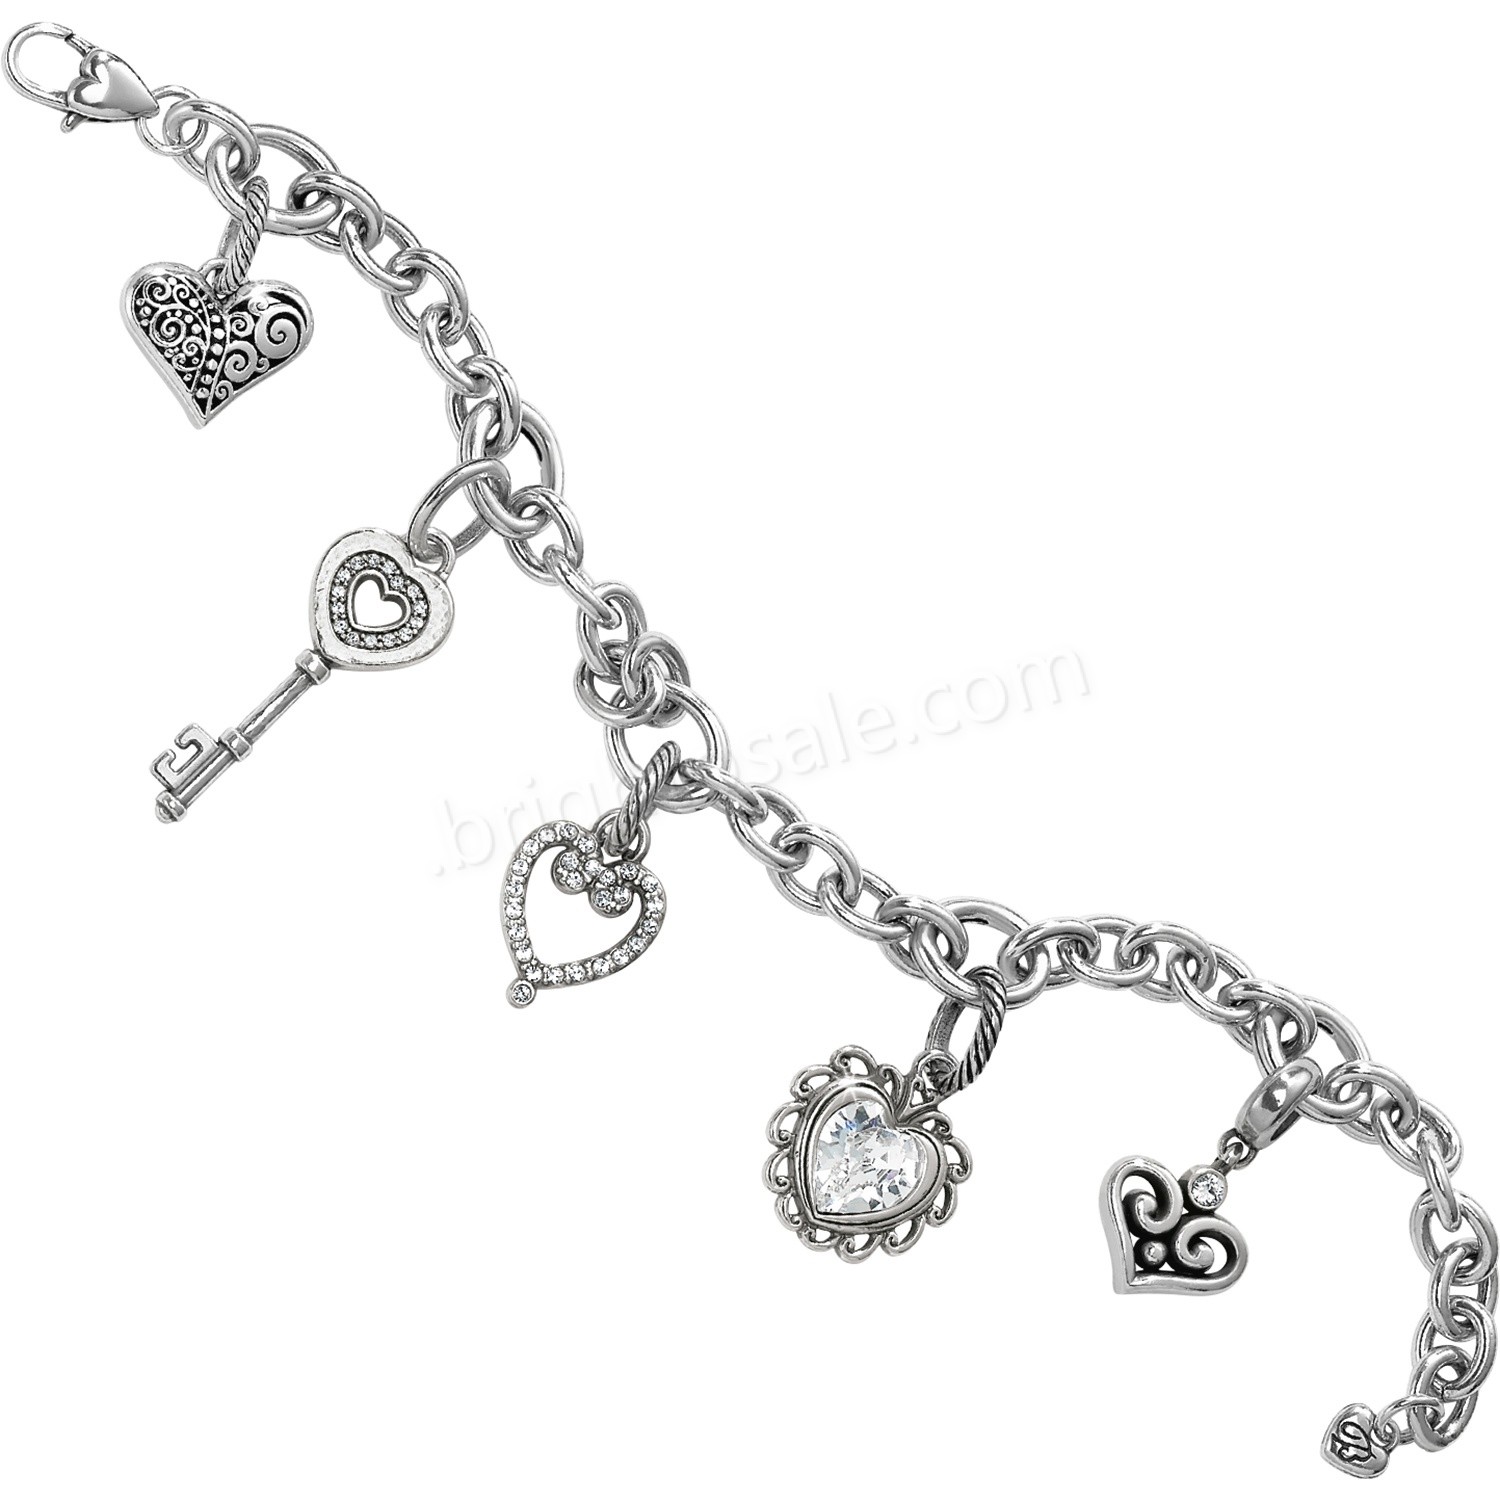 Brighton Collectibles & Online Discount Starry Night Cross Charm Bracelet - Brighton Collectibles & Online Discount Starry Night Cross Charm Bracelet